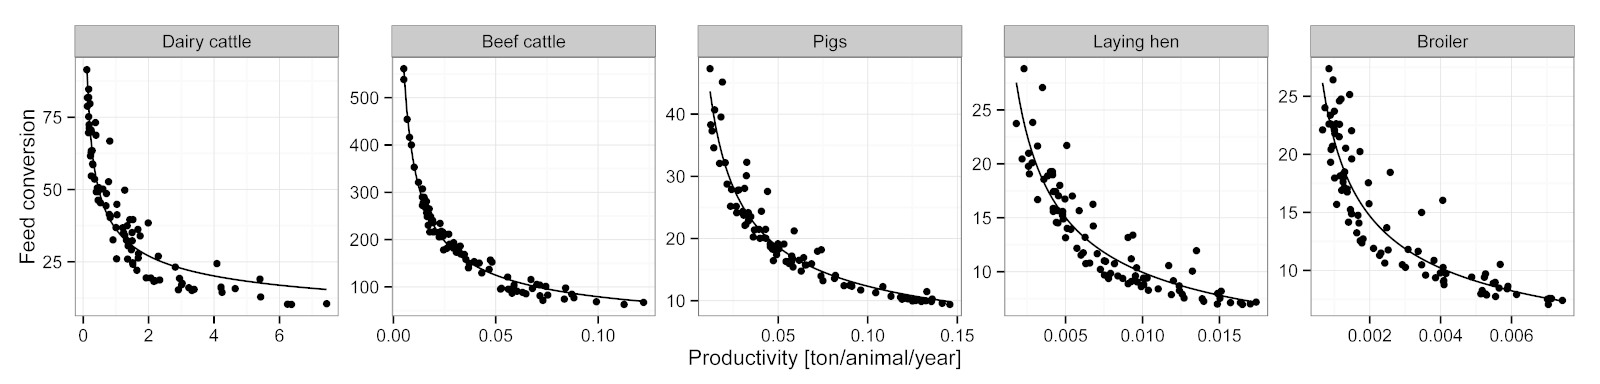 Relationship between feed conversion and livestock productivity (Weindl, Bodirsky, et al. 2017).